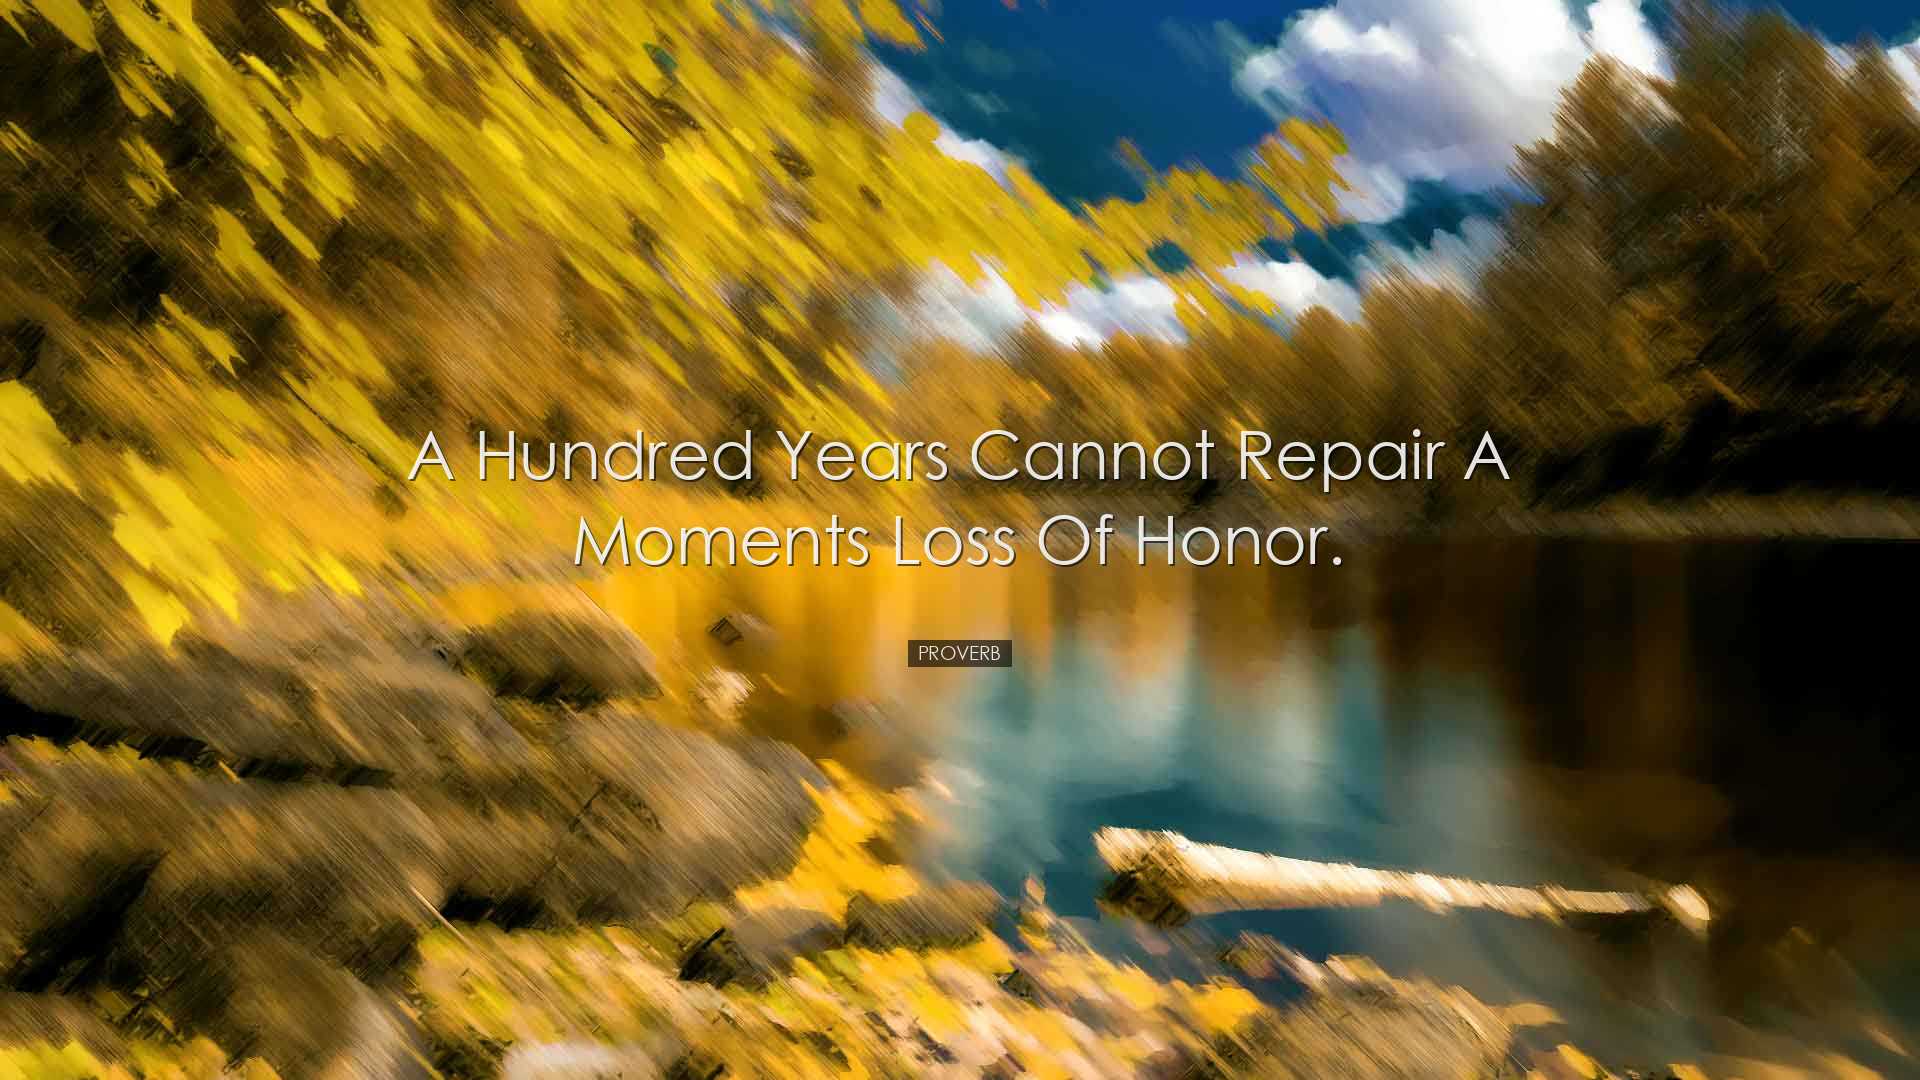 A hundred years cannot repair a moments loss of honor. - Proverb